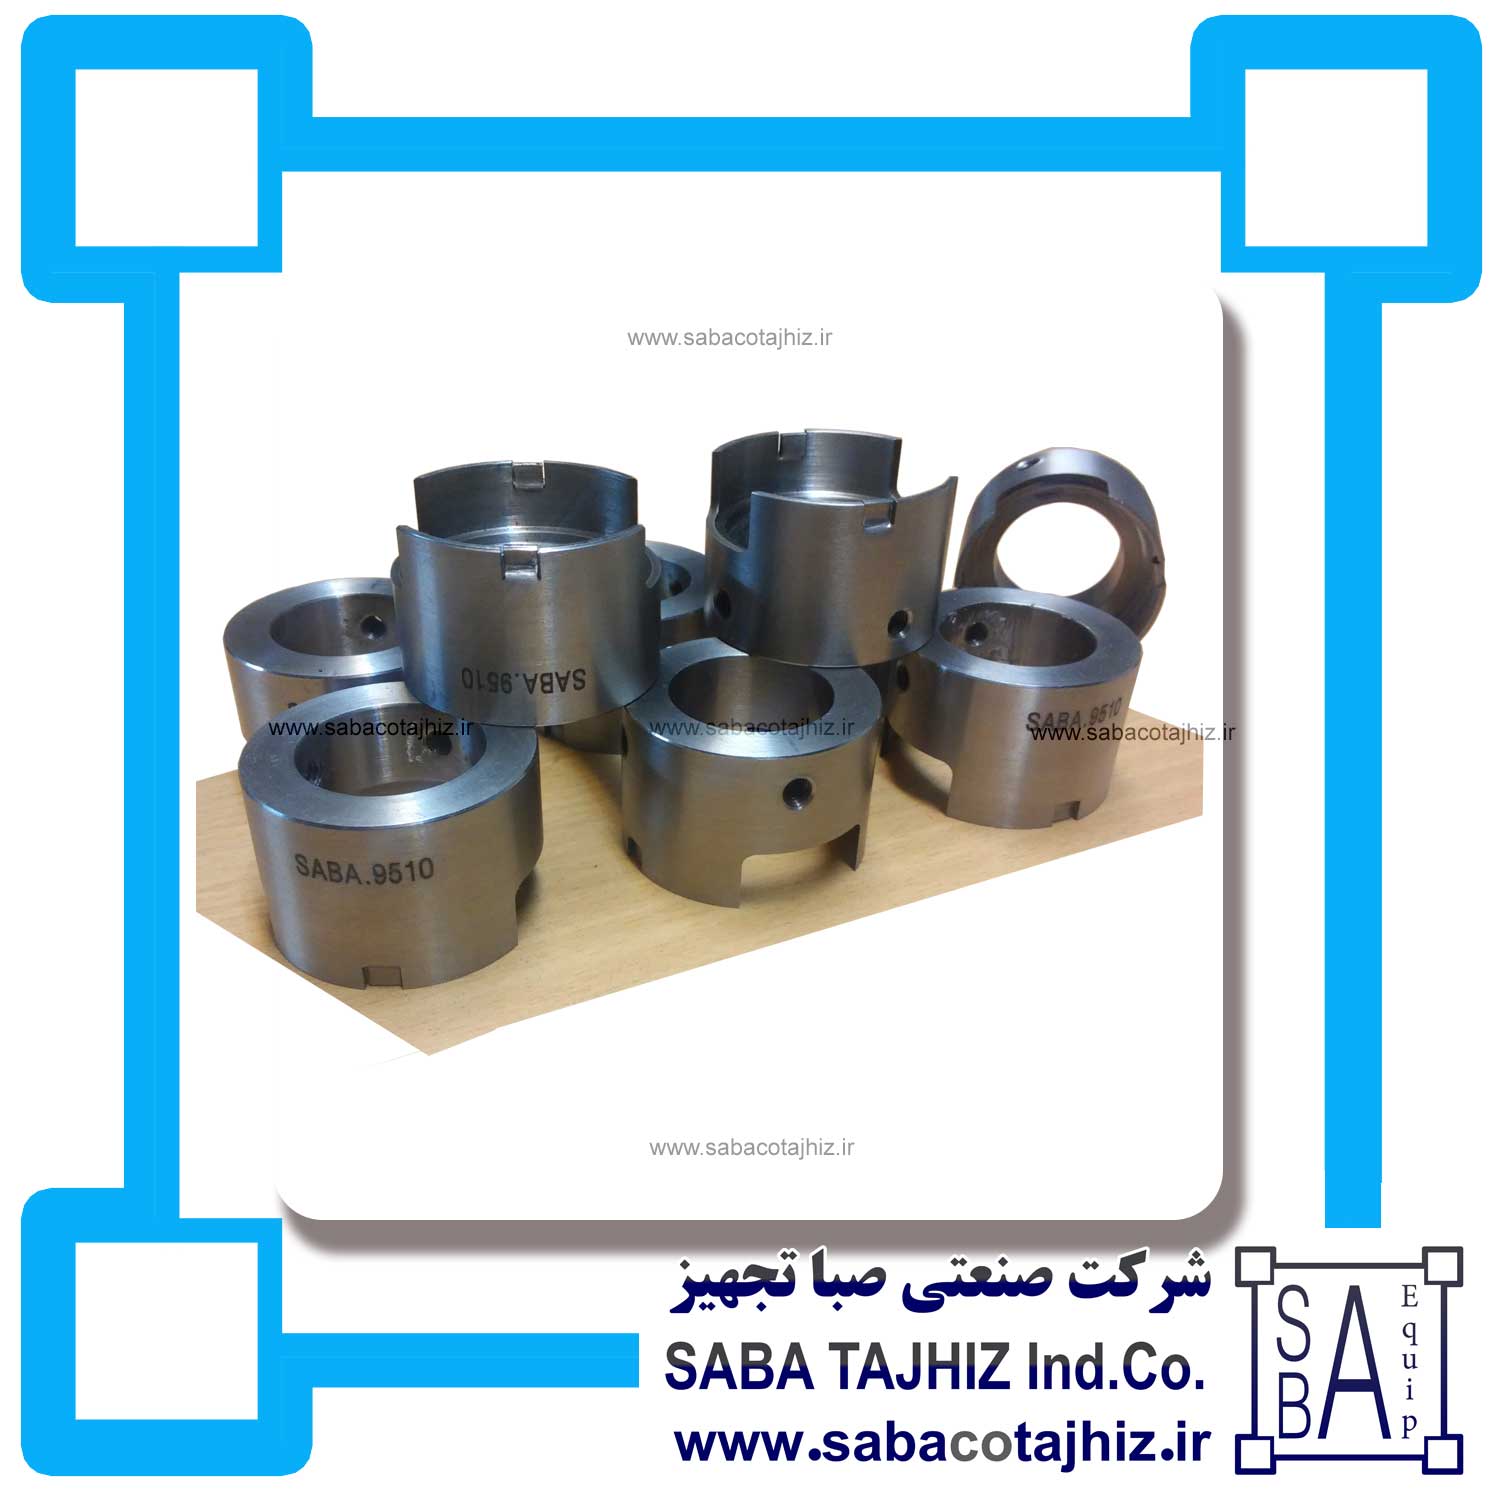 Insulation Plant Stainless Steel Mechanical Seal